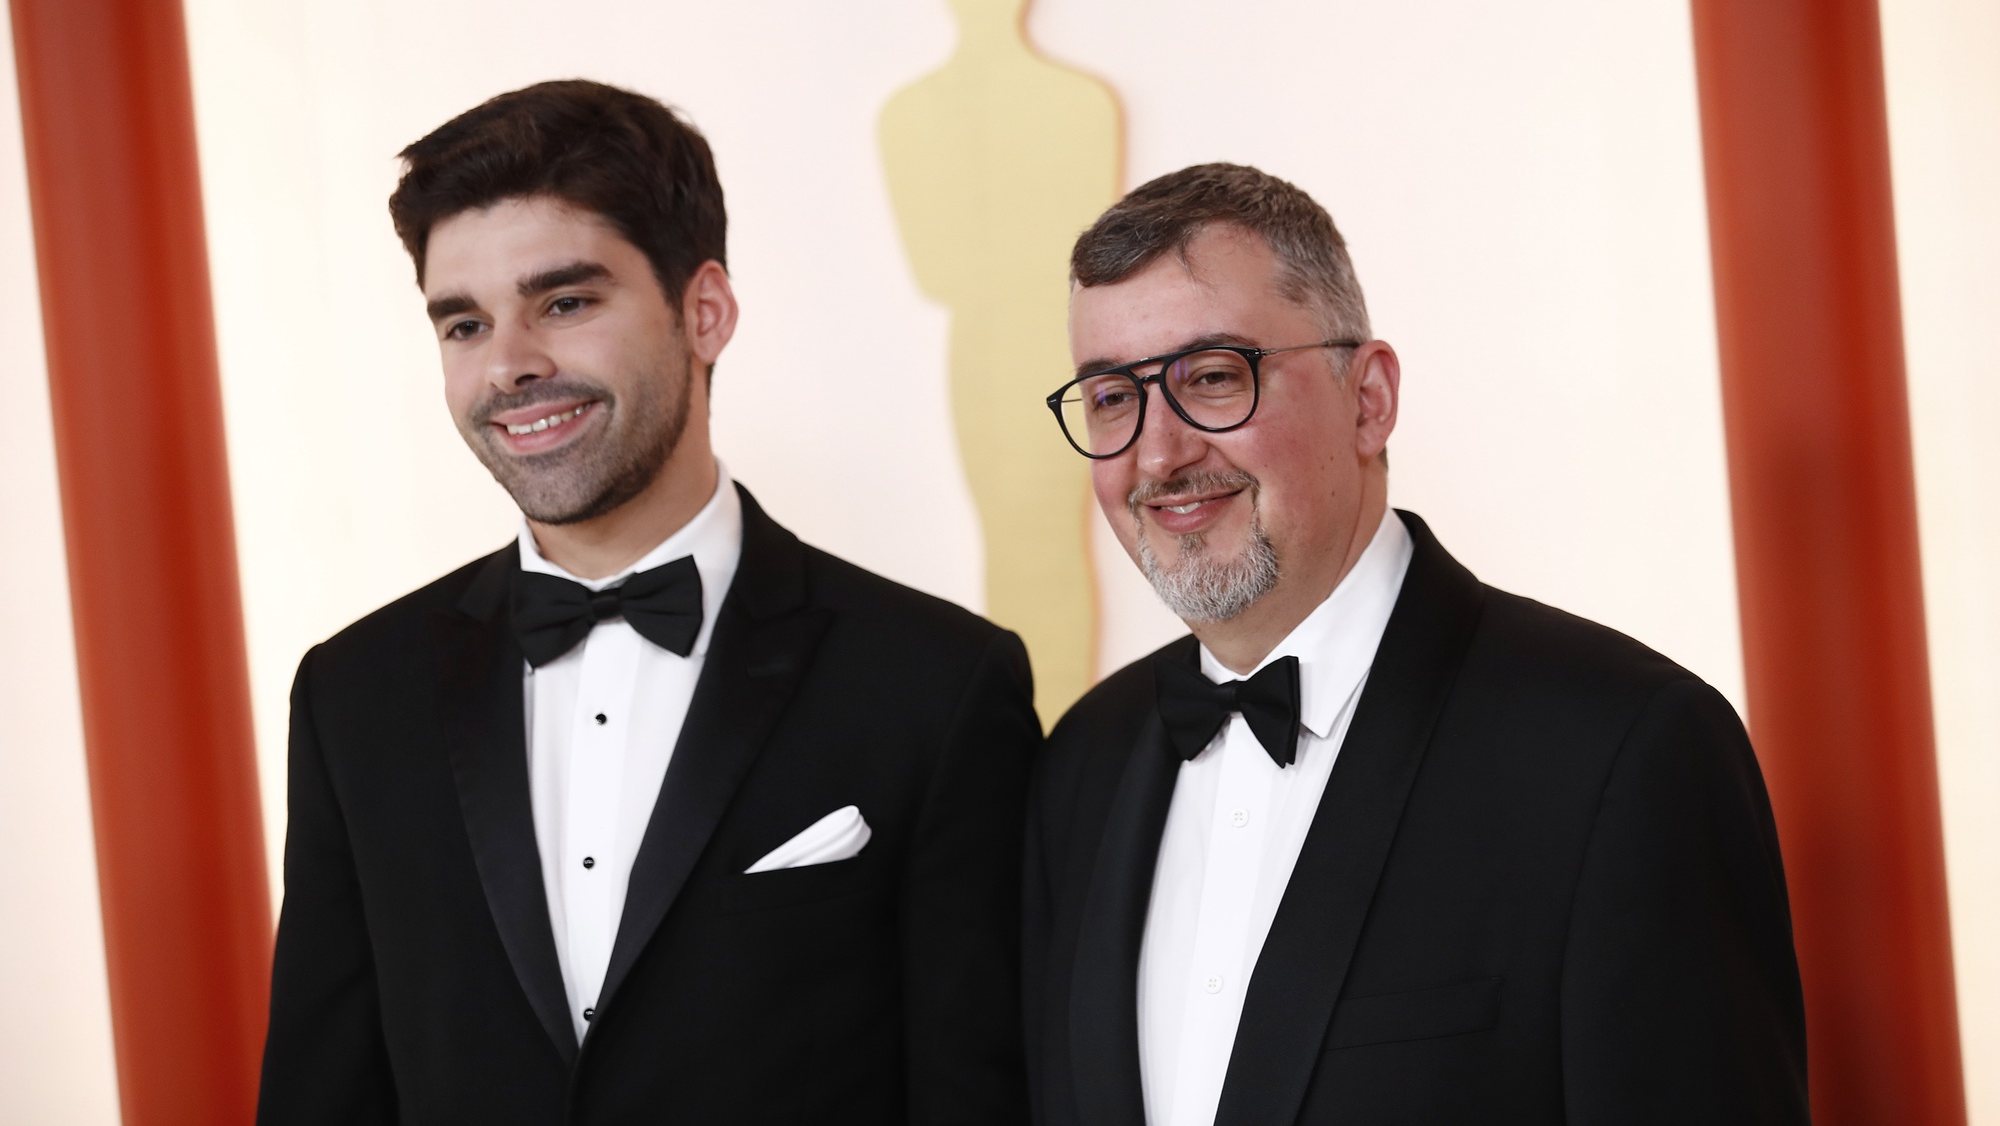 epa10517751 (L-R) Joao Gonzalez and Bruno Caetano arrive for the 95th annual Academy Awards ceremony at the Dolby Theatre in Hollywood, Los Angeles, California, USA, 12 March 2023. The Oscars are presented for outstanding individual or collective efforts in filmmaking in 24 categories.  EPA/CAROLINE BREHMAN